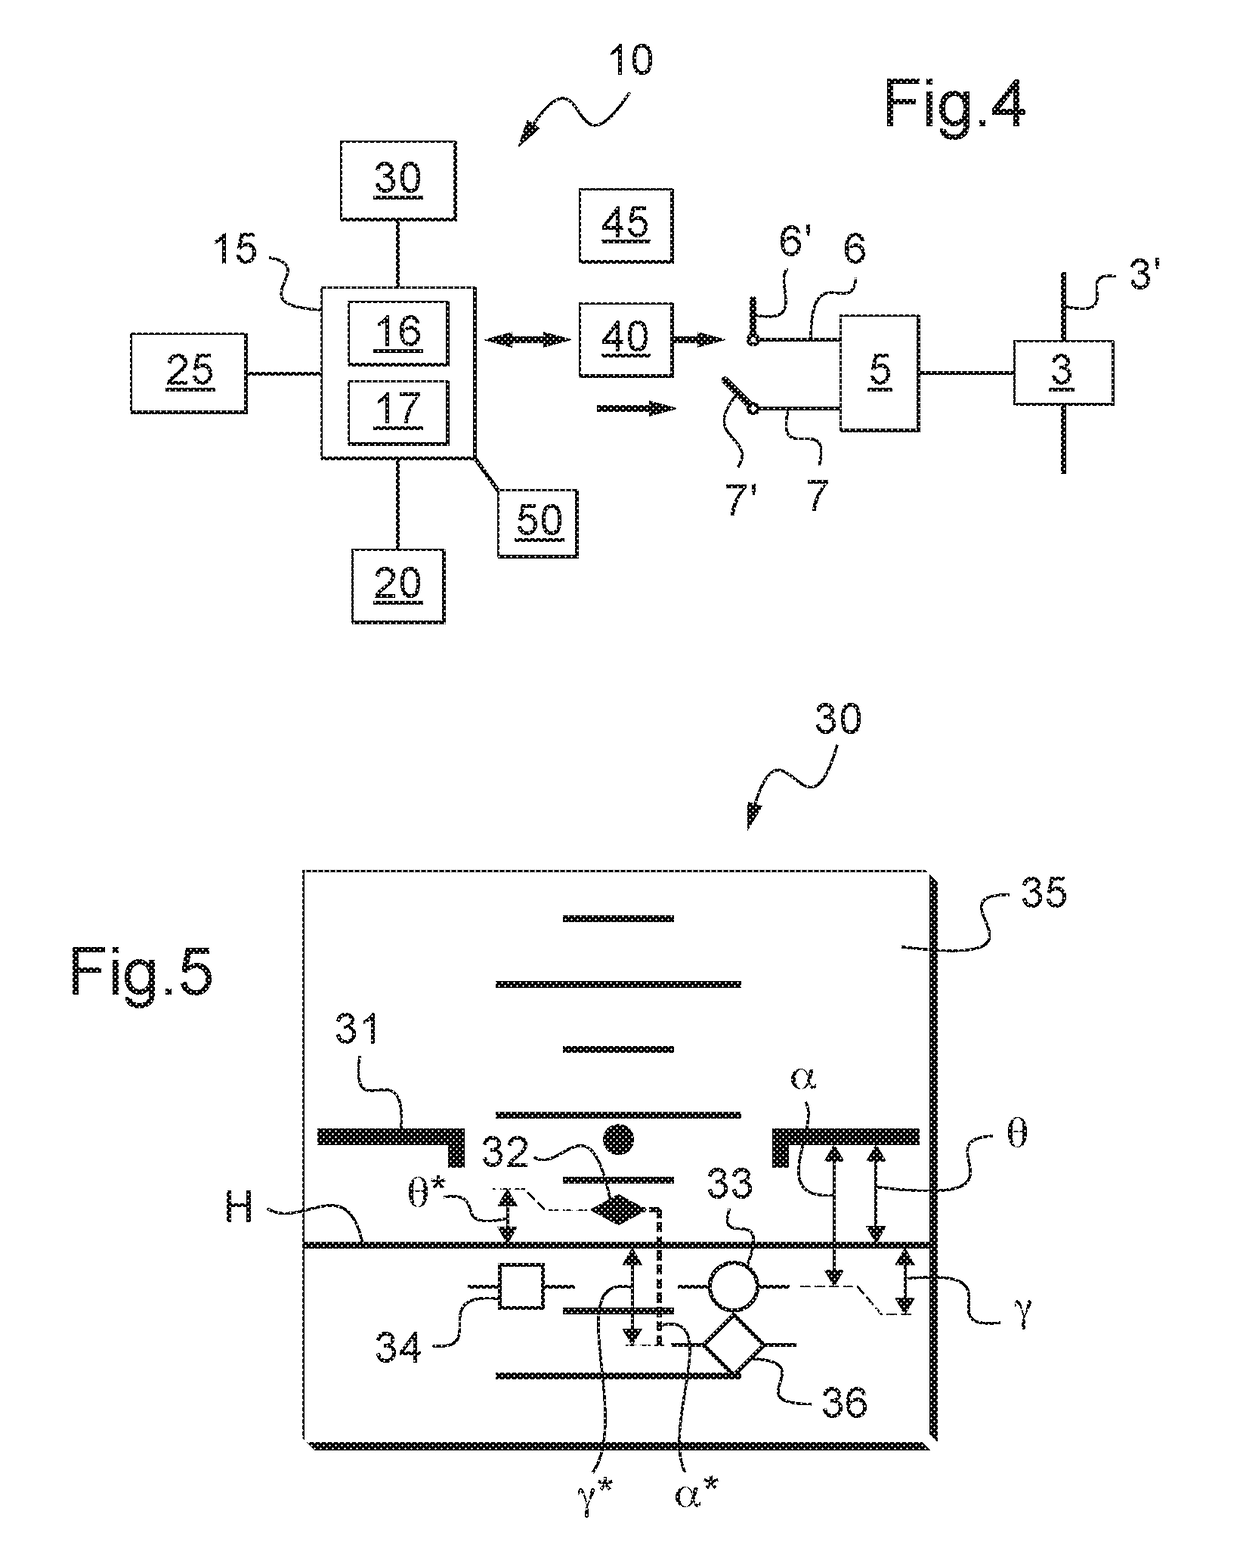 Method for Automatic Piloting of a Rotary Wing Aircraft Having at Least One Thruster Propeller, Associated Automatic Autopilot Device, and Aircraft